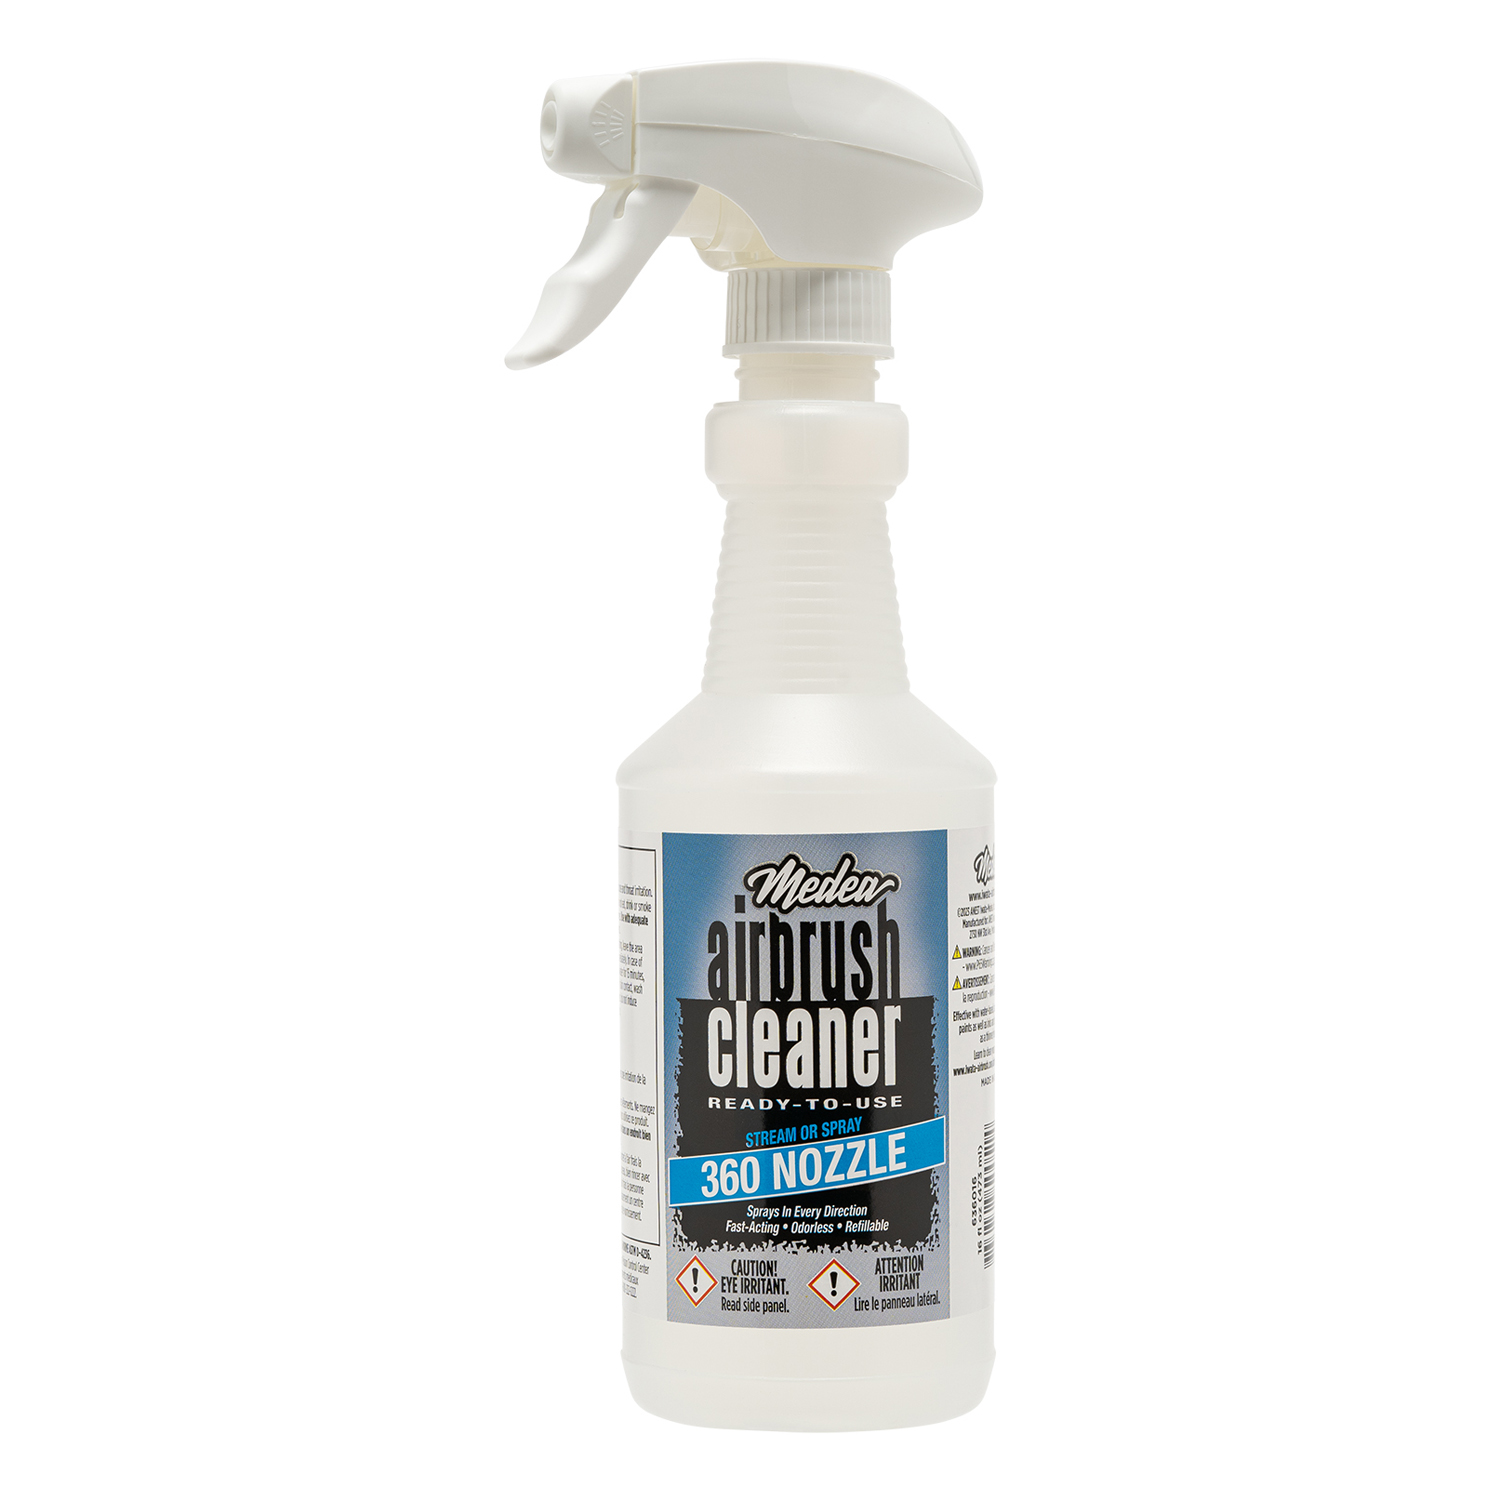 Medea Airbrush Cleaner with Invertible 360° Nozzle 16 oz: Anest